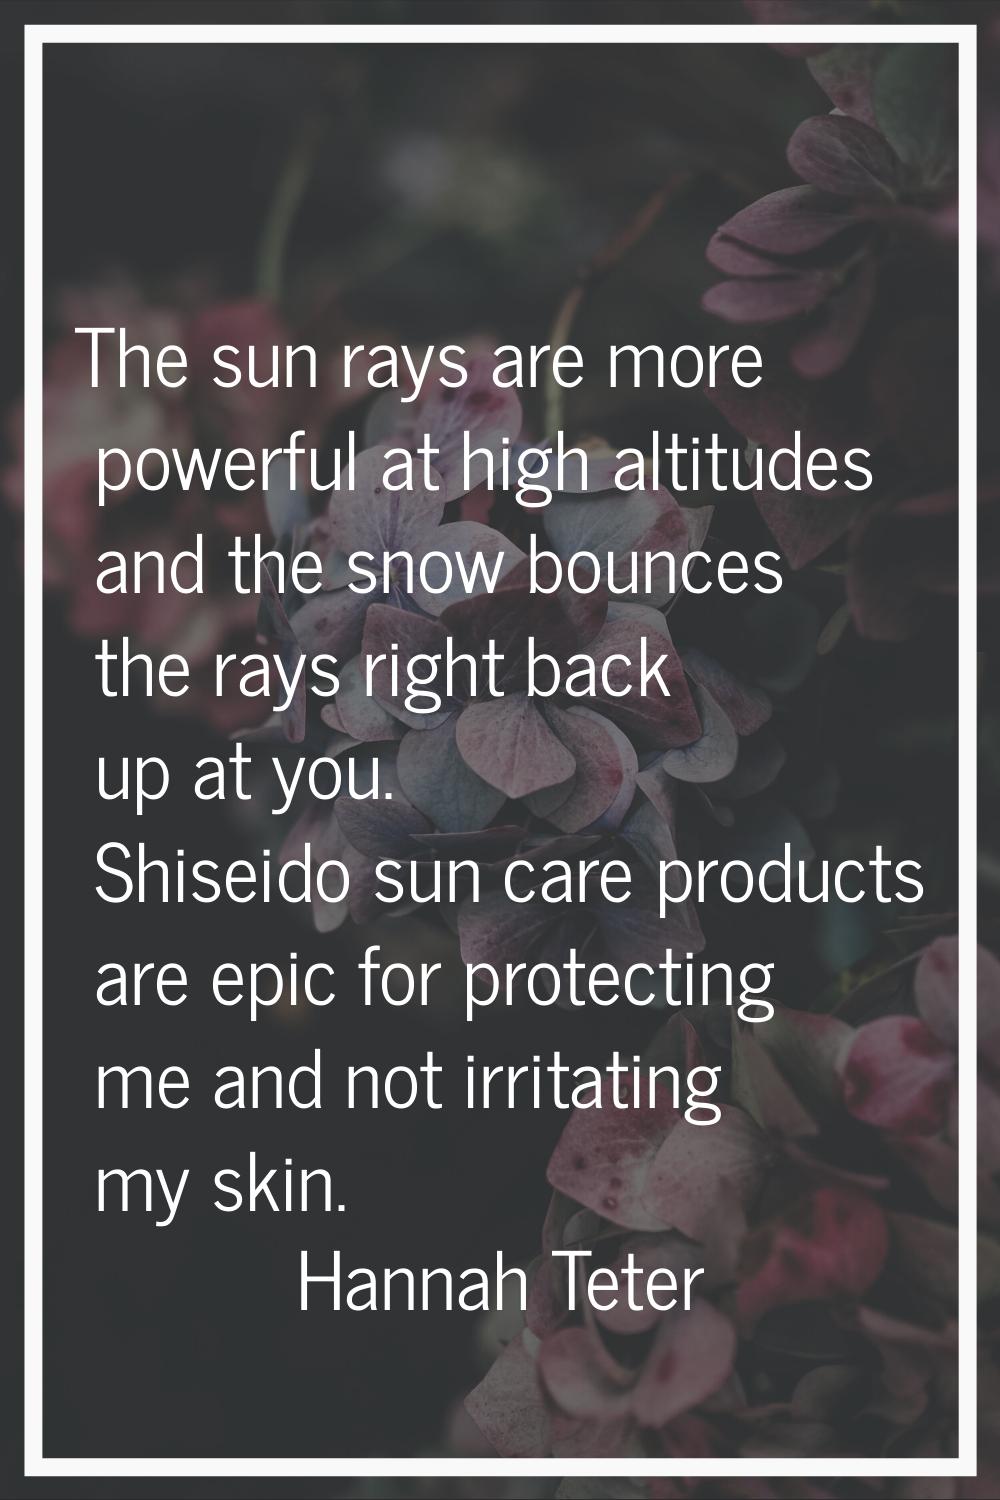 The sun rays are more powerful at high altitudes and the snow bounces the rays right back up at you